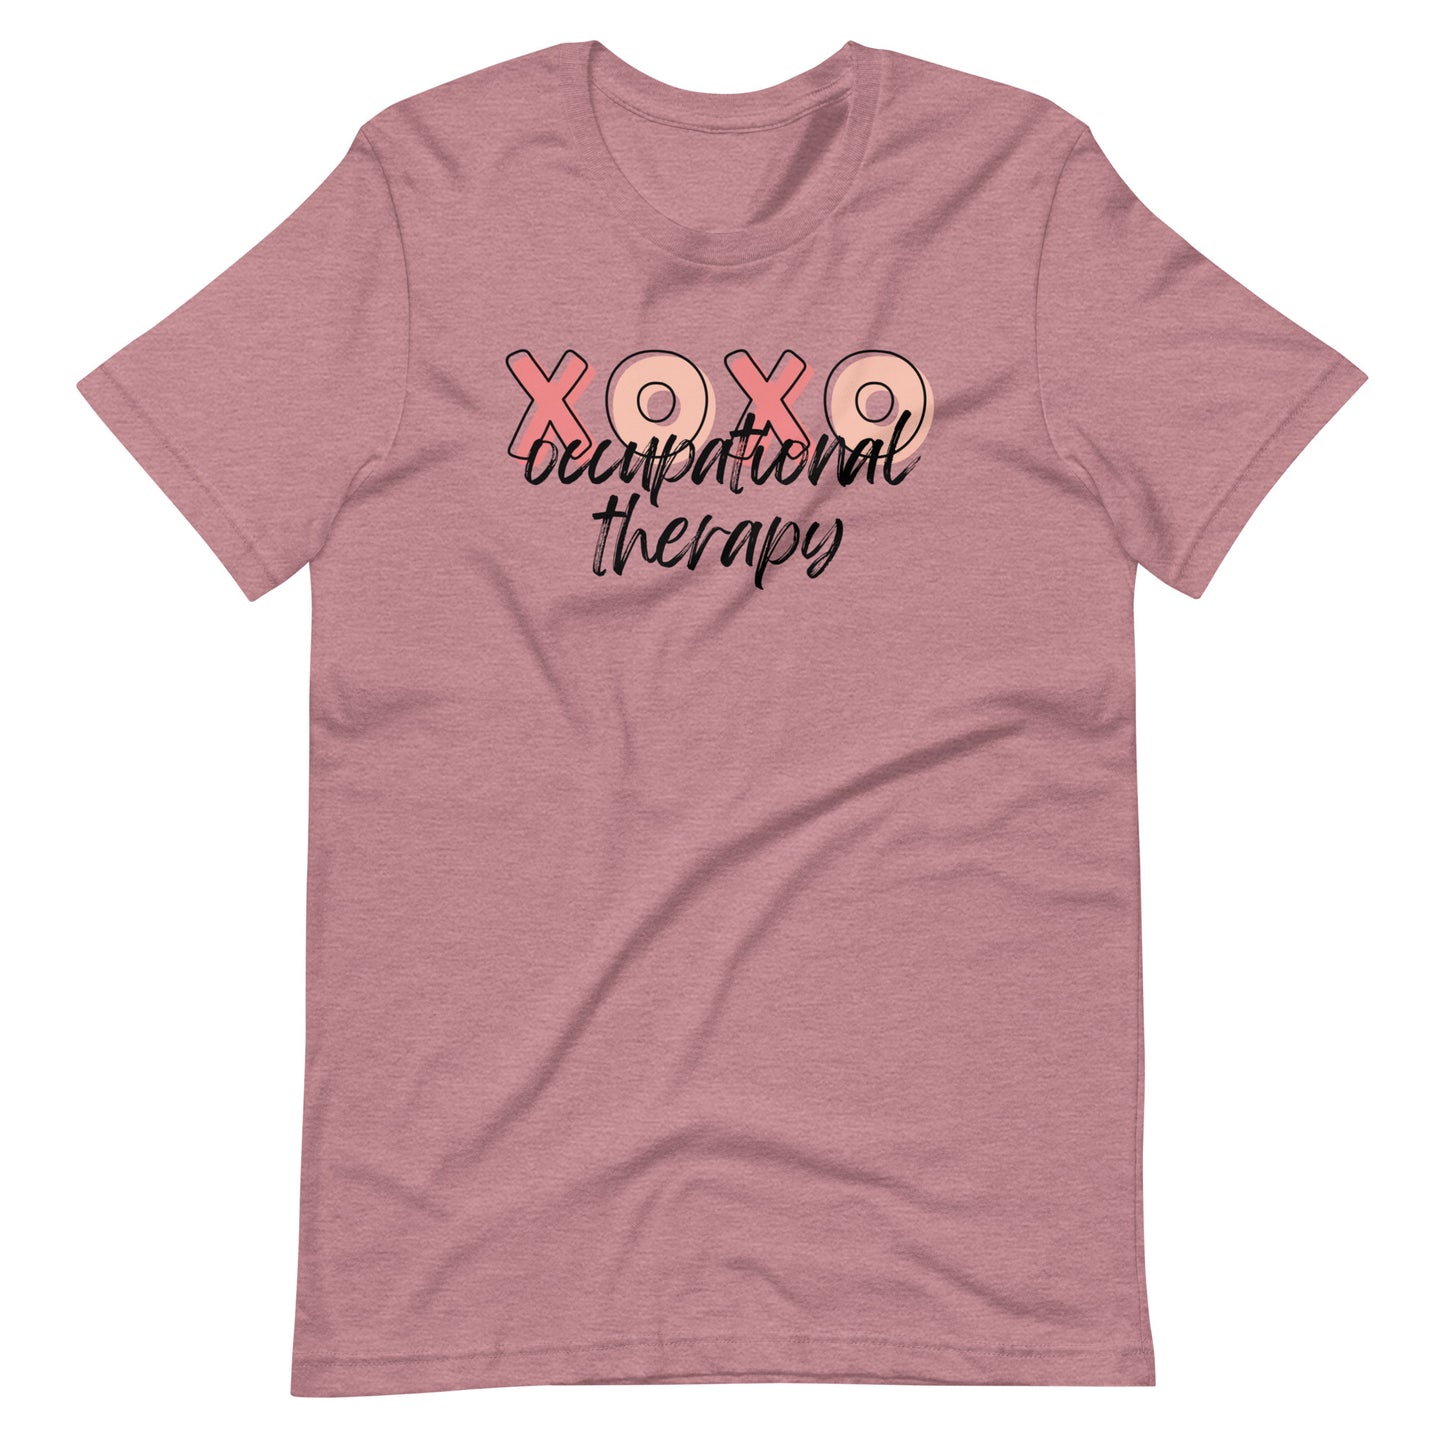 XOXO Occupational Therapy Tee